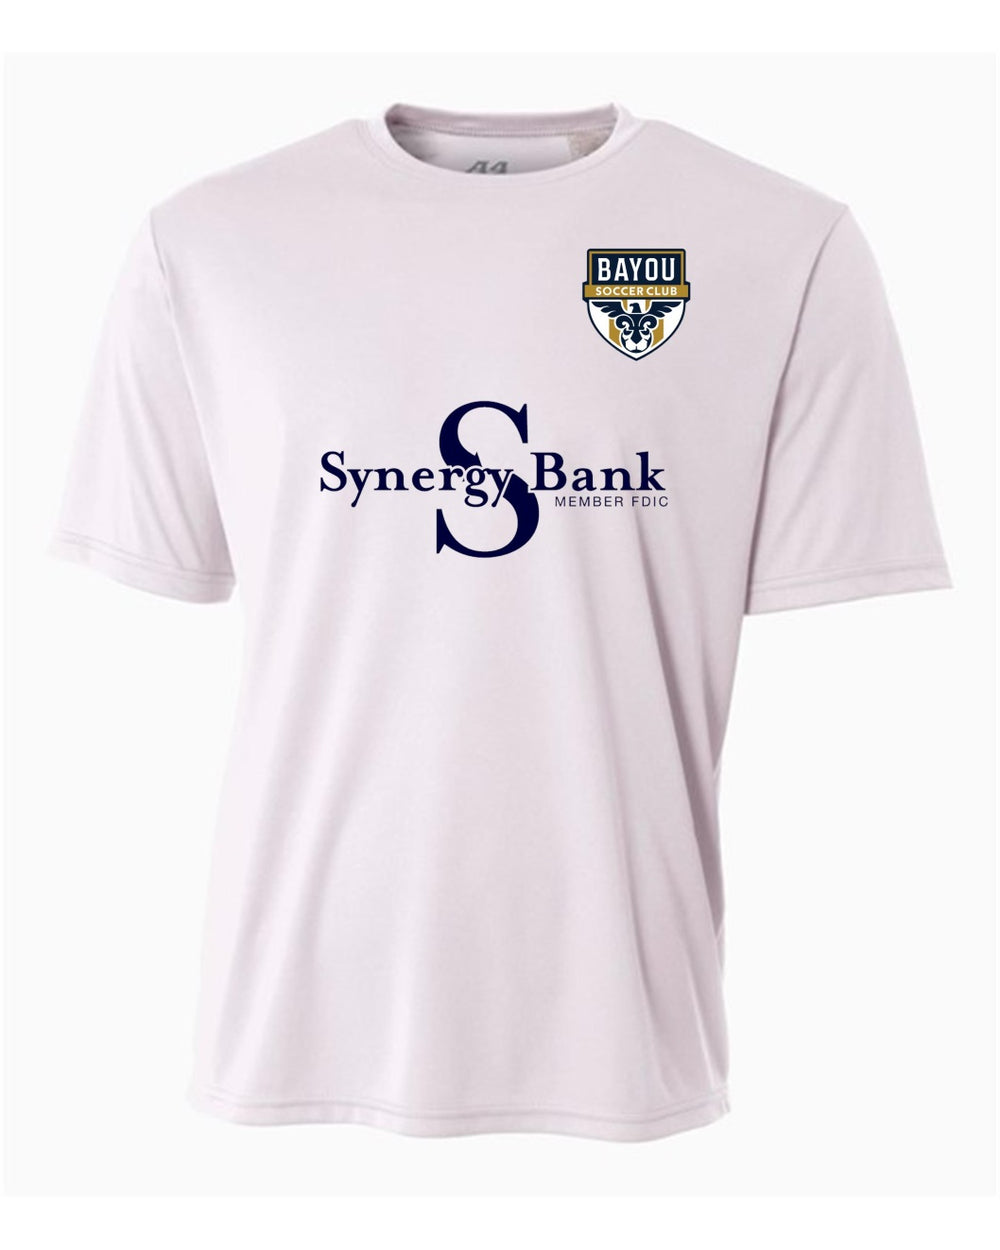 A4 Bayou SC Youth Recreational Jersey - Navy and White Bayou Soccer Club Rec White Youth X-Small - Third Coast Soccer